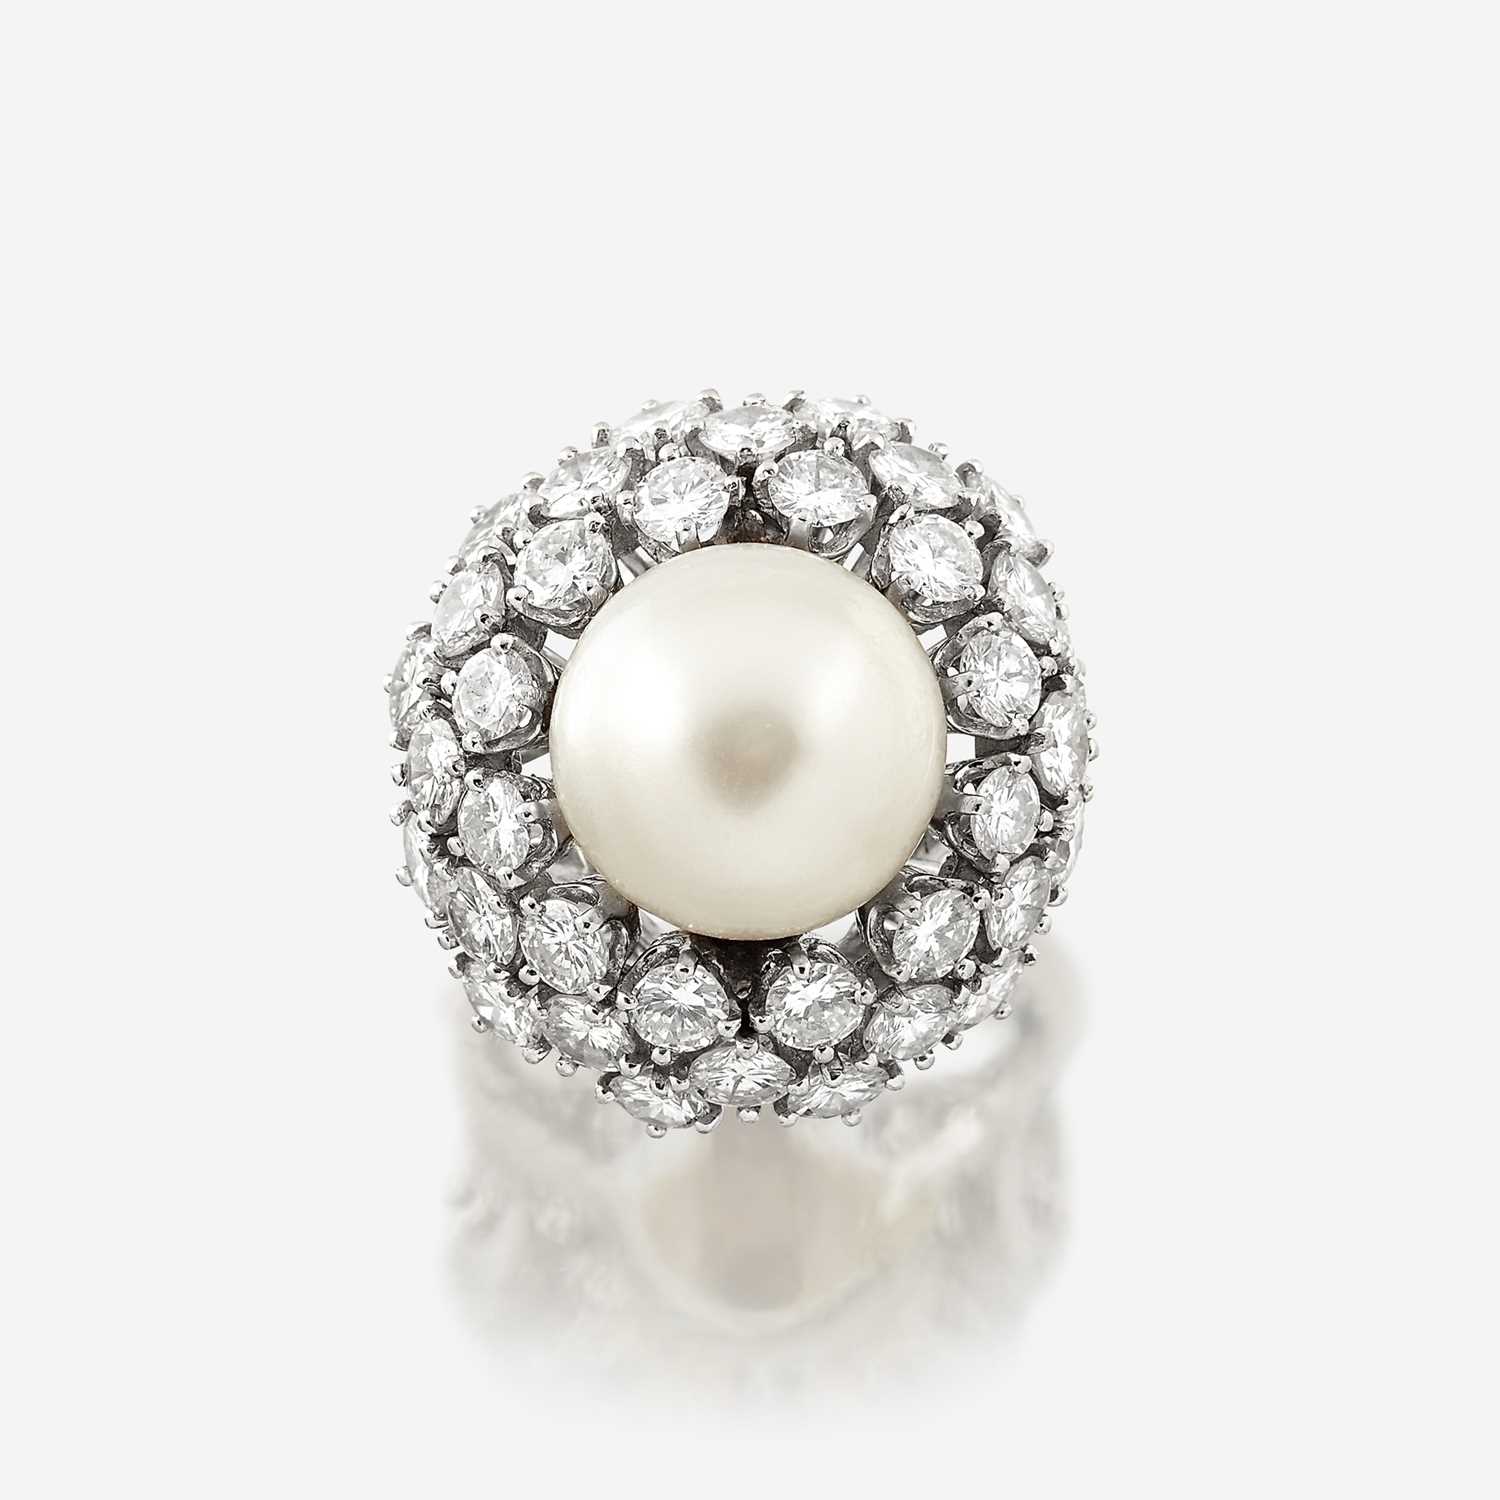 Lot 103 - A cultured pearl, diamond, and eighteen karat white gold ring